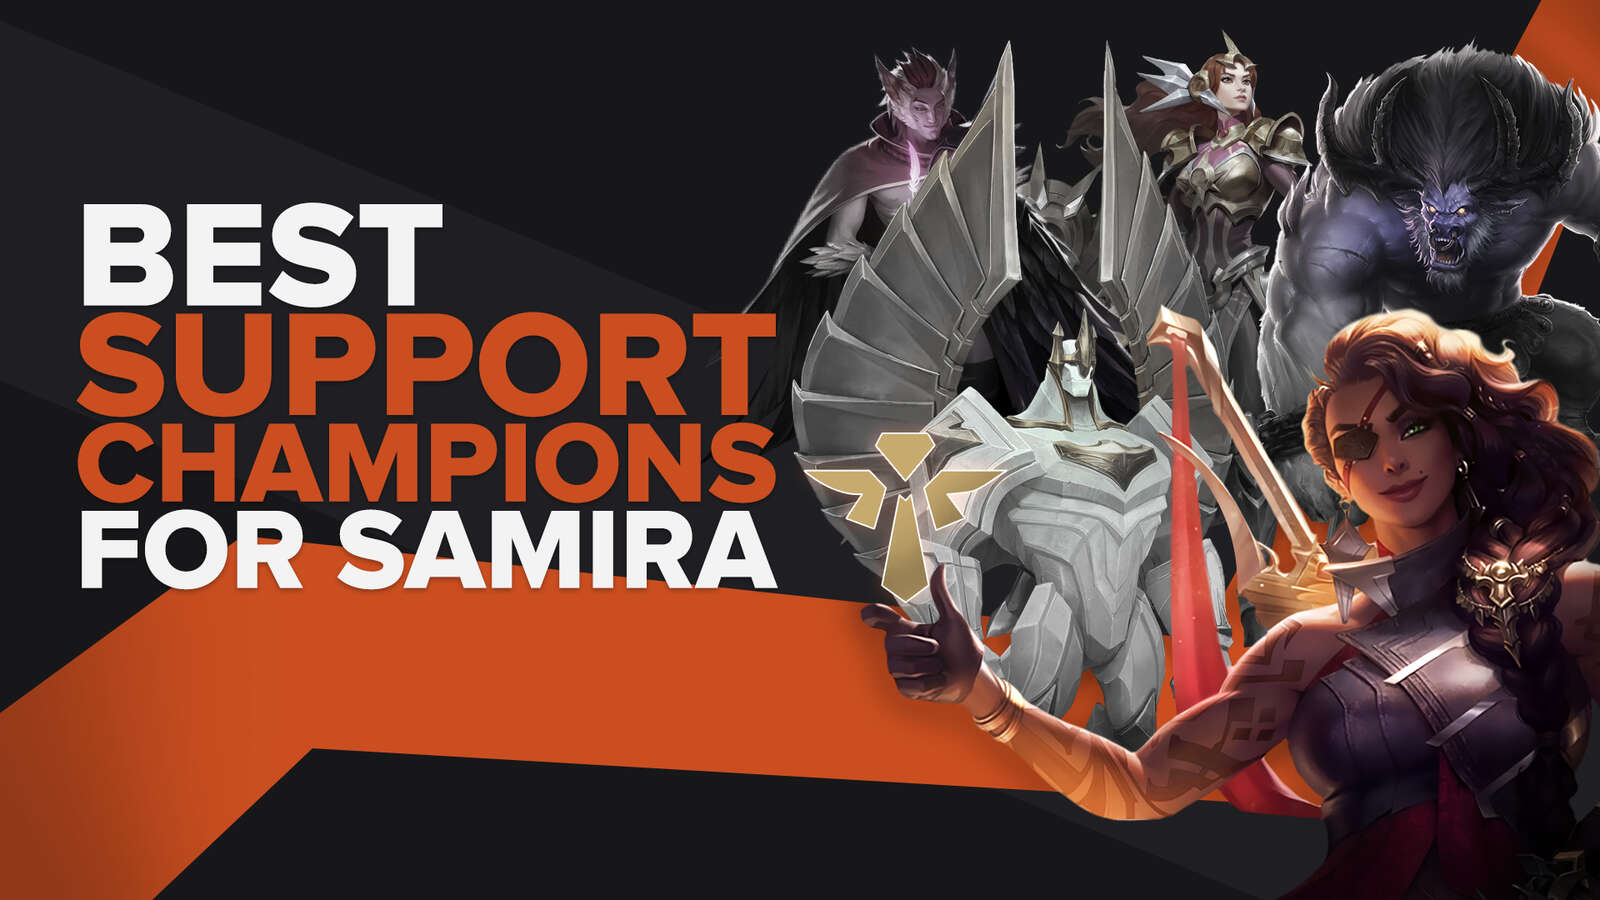 The 5 Best Support Champions For Samira in LoL